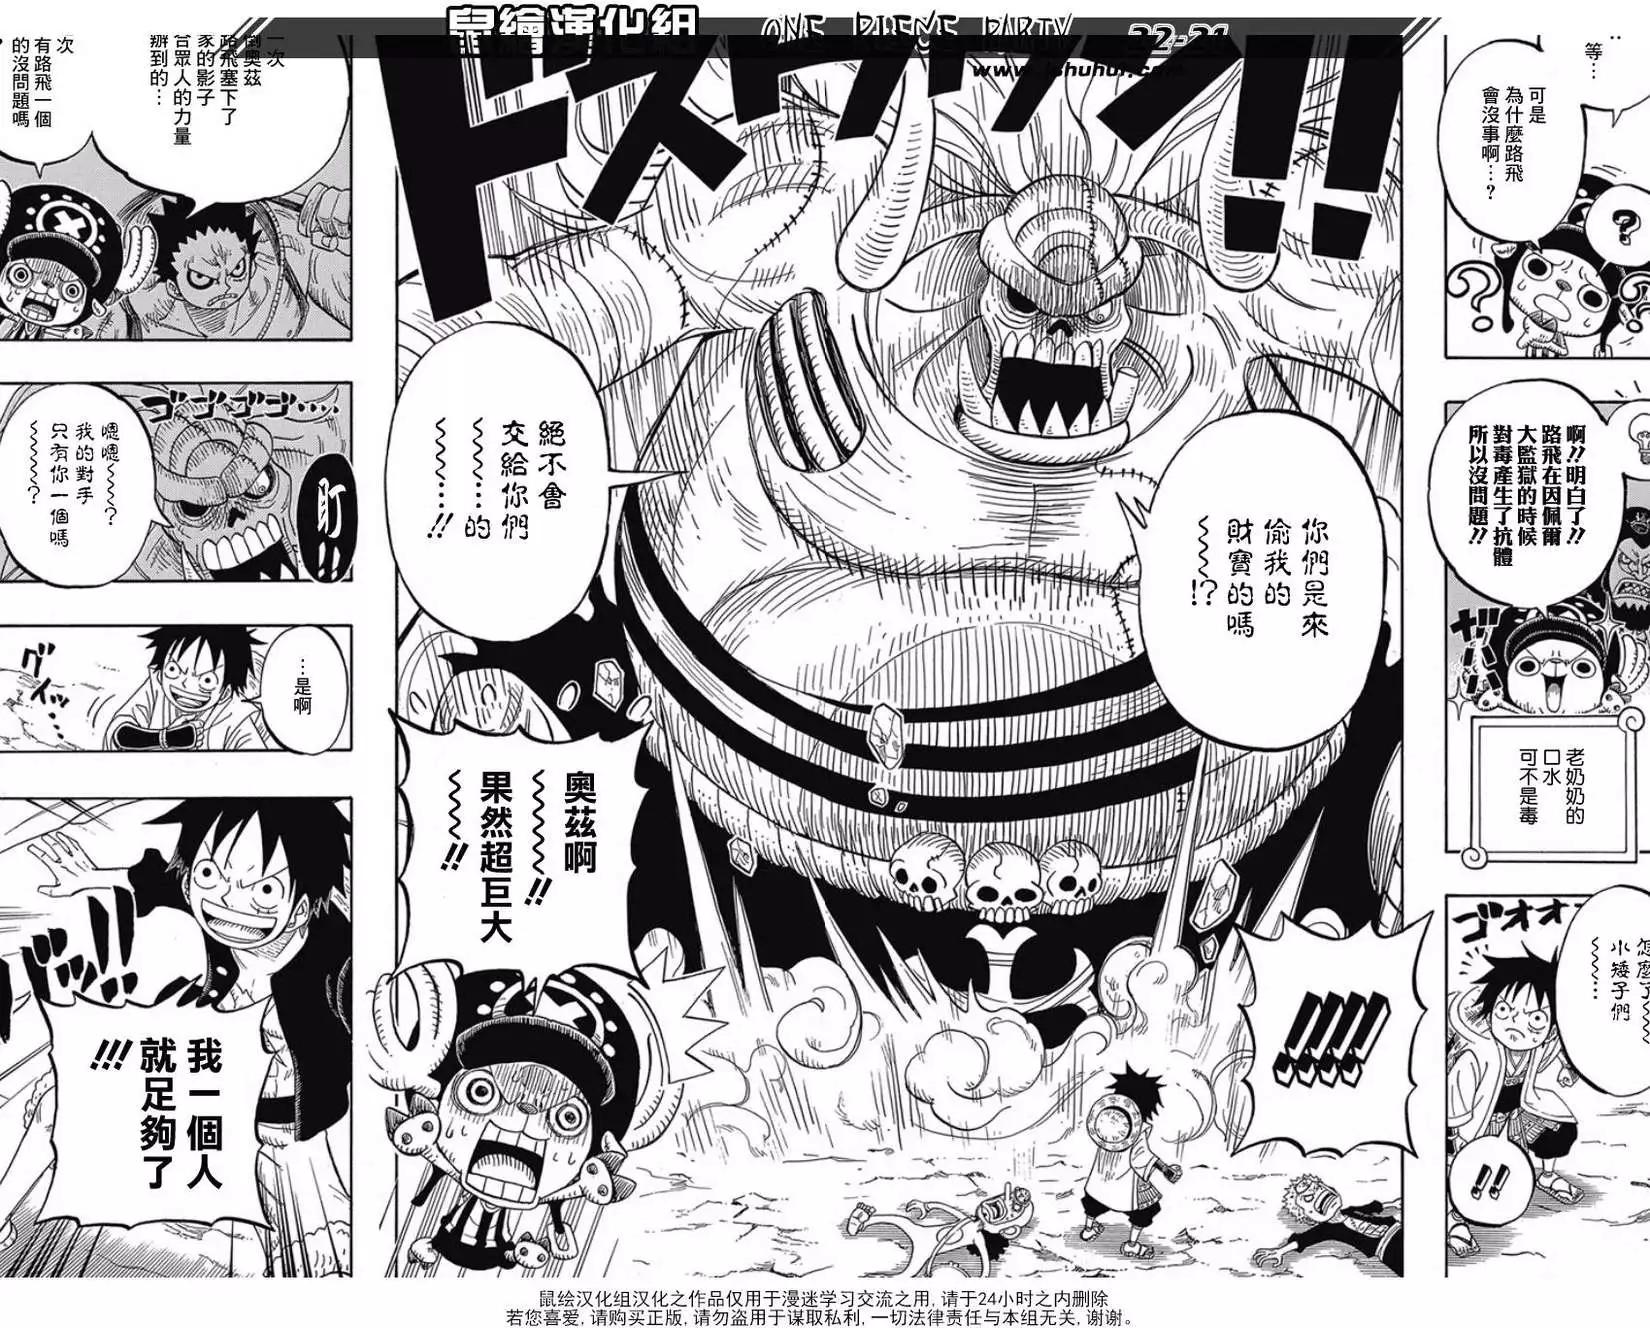 One piece party - 第03回 - 2